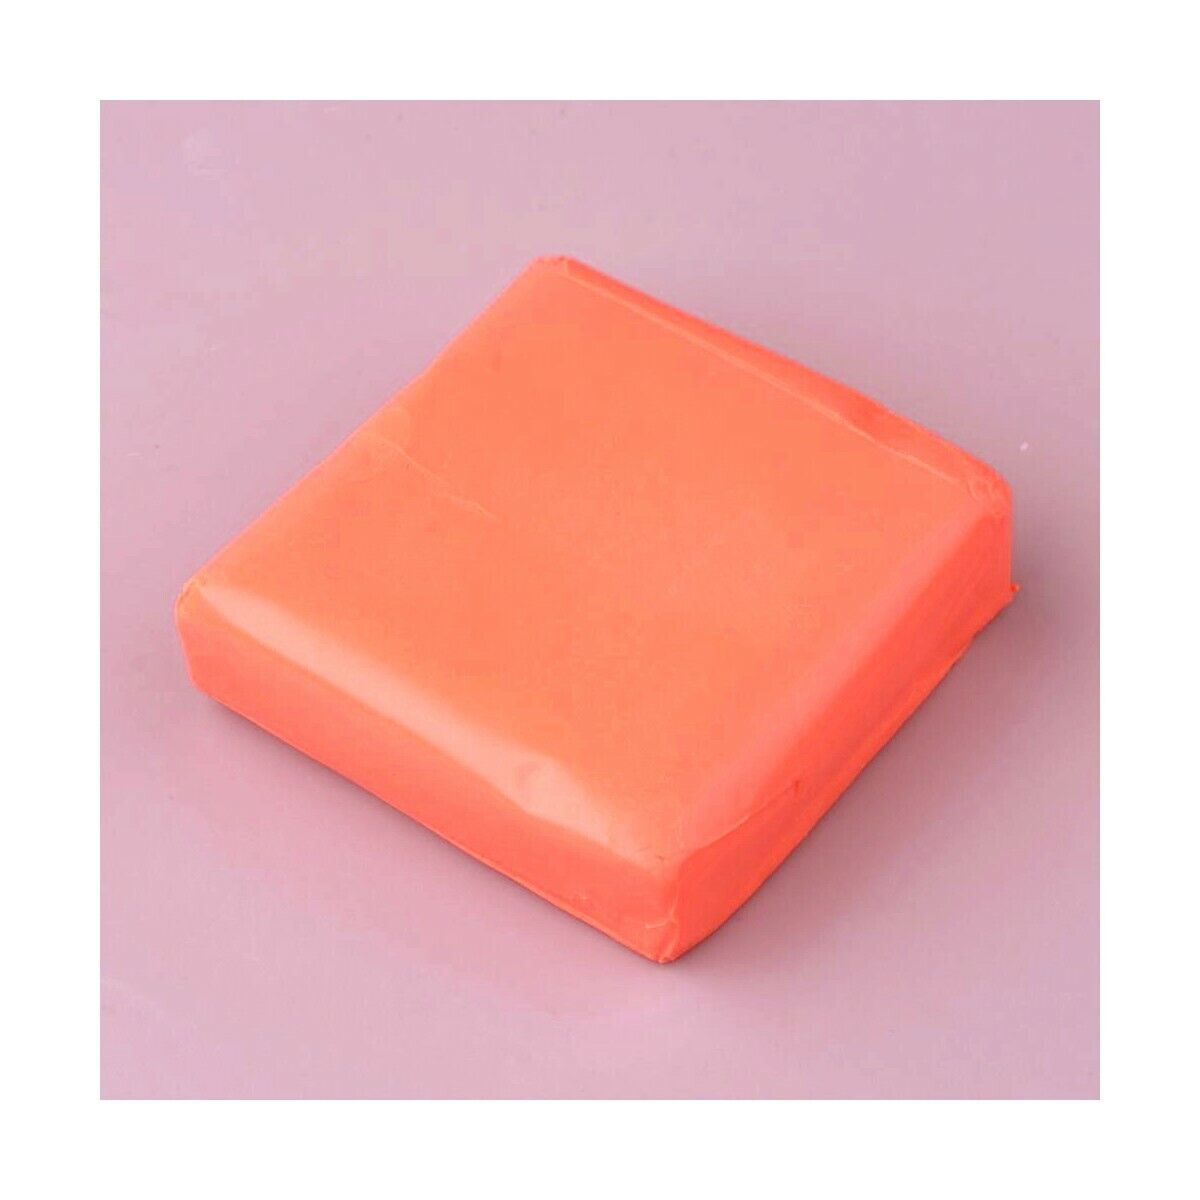 Polymer Modelling Clays Bright Orange 50x50mm Oven Bake 2 Packs Of 50g+